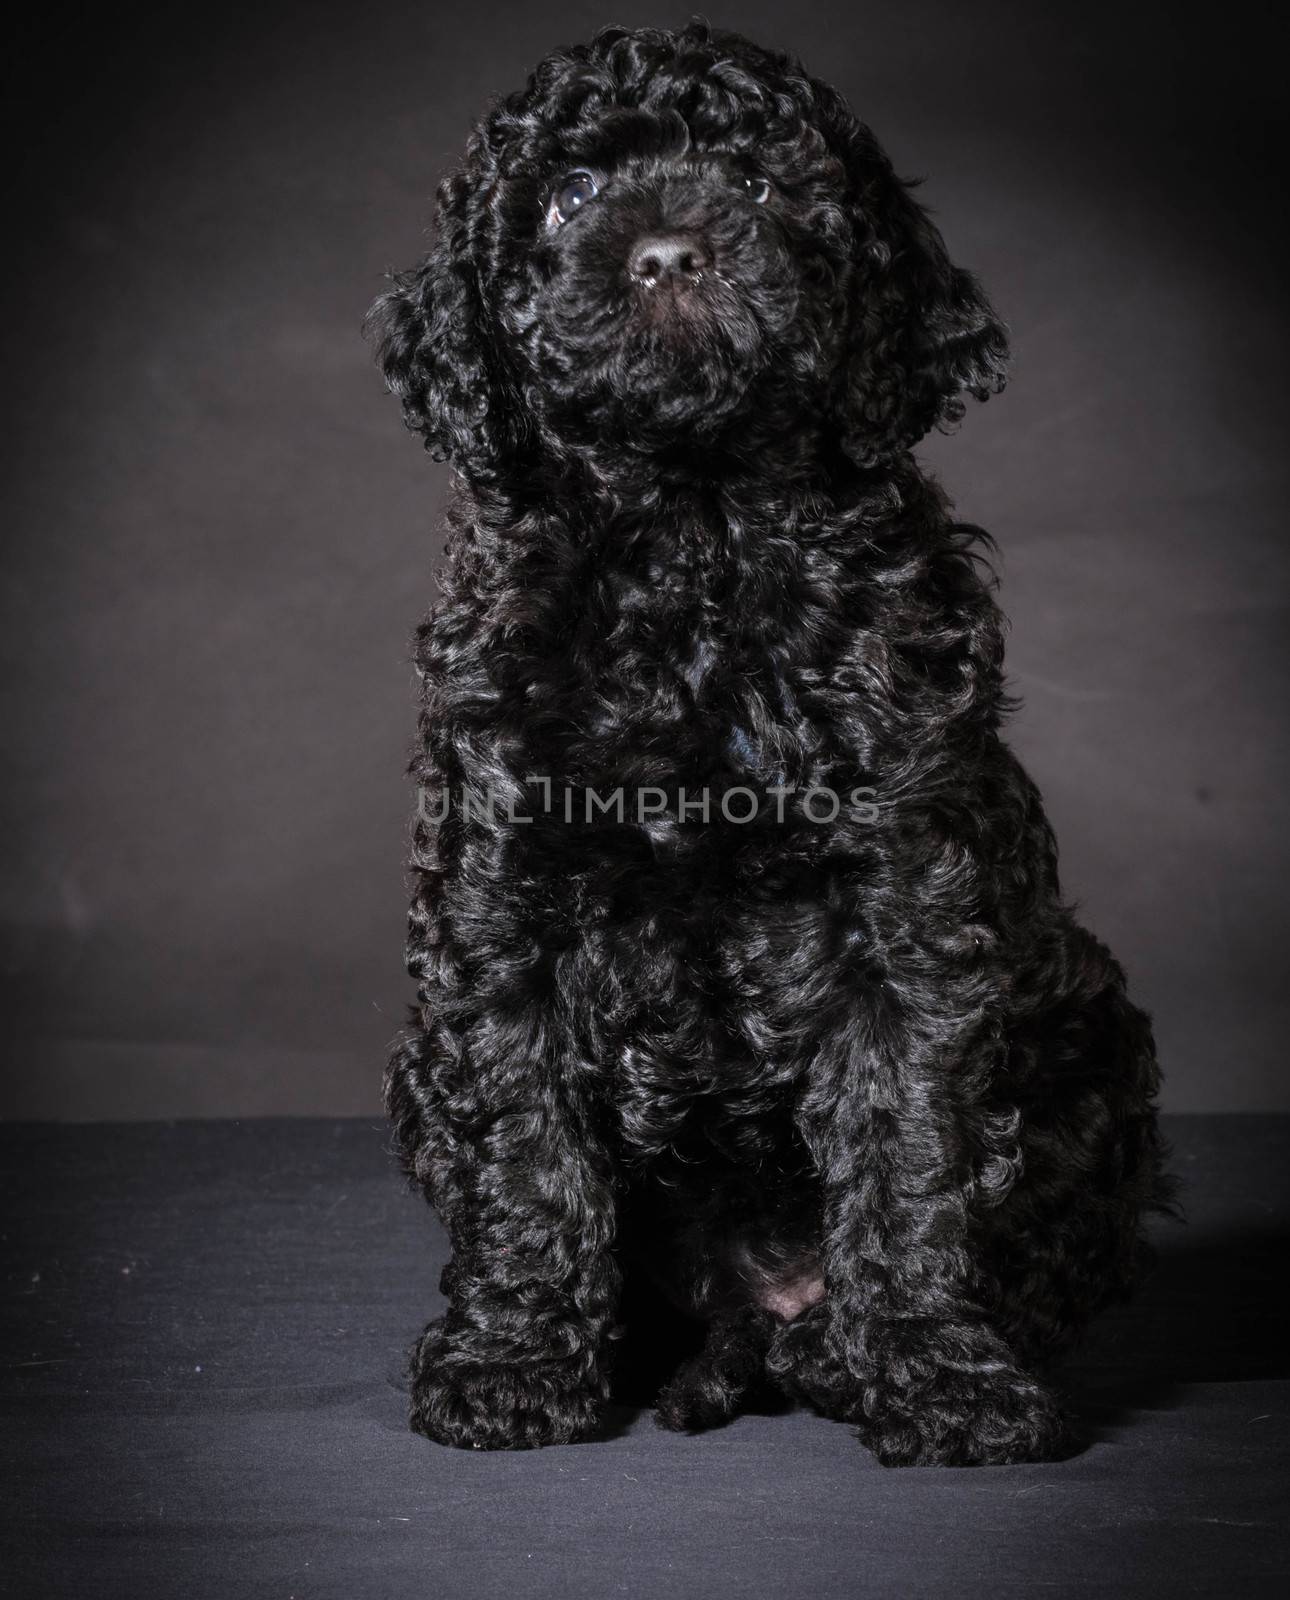 cute barbet puppy sitting on black background